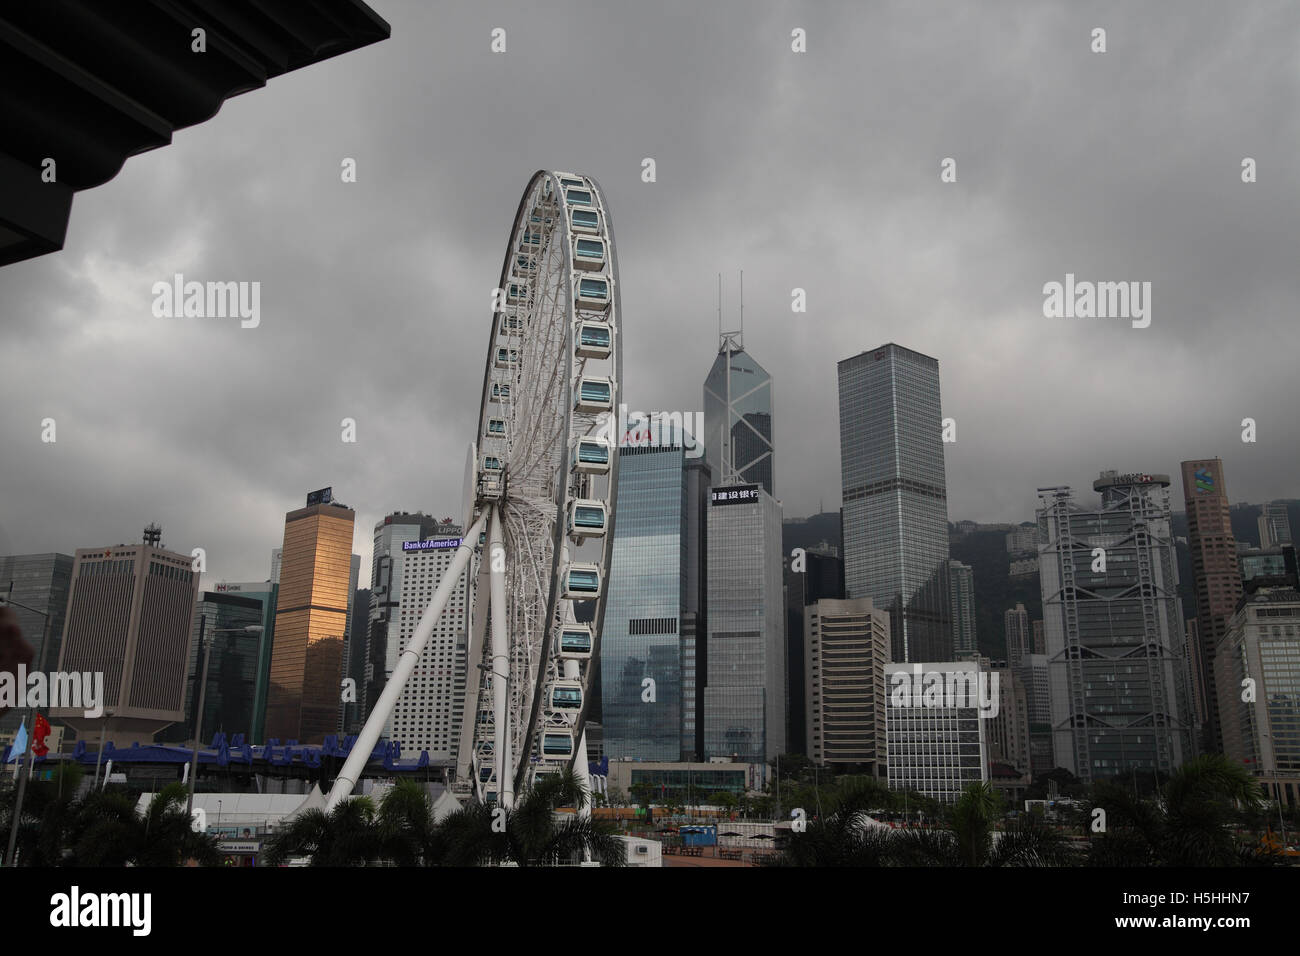 Unnamed giant wheel and the Hong Kong skyline, high rise commercial buildings, yellow on the left is the Far East Finance Centre Stock Photo